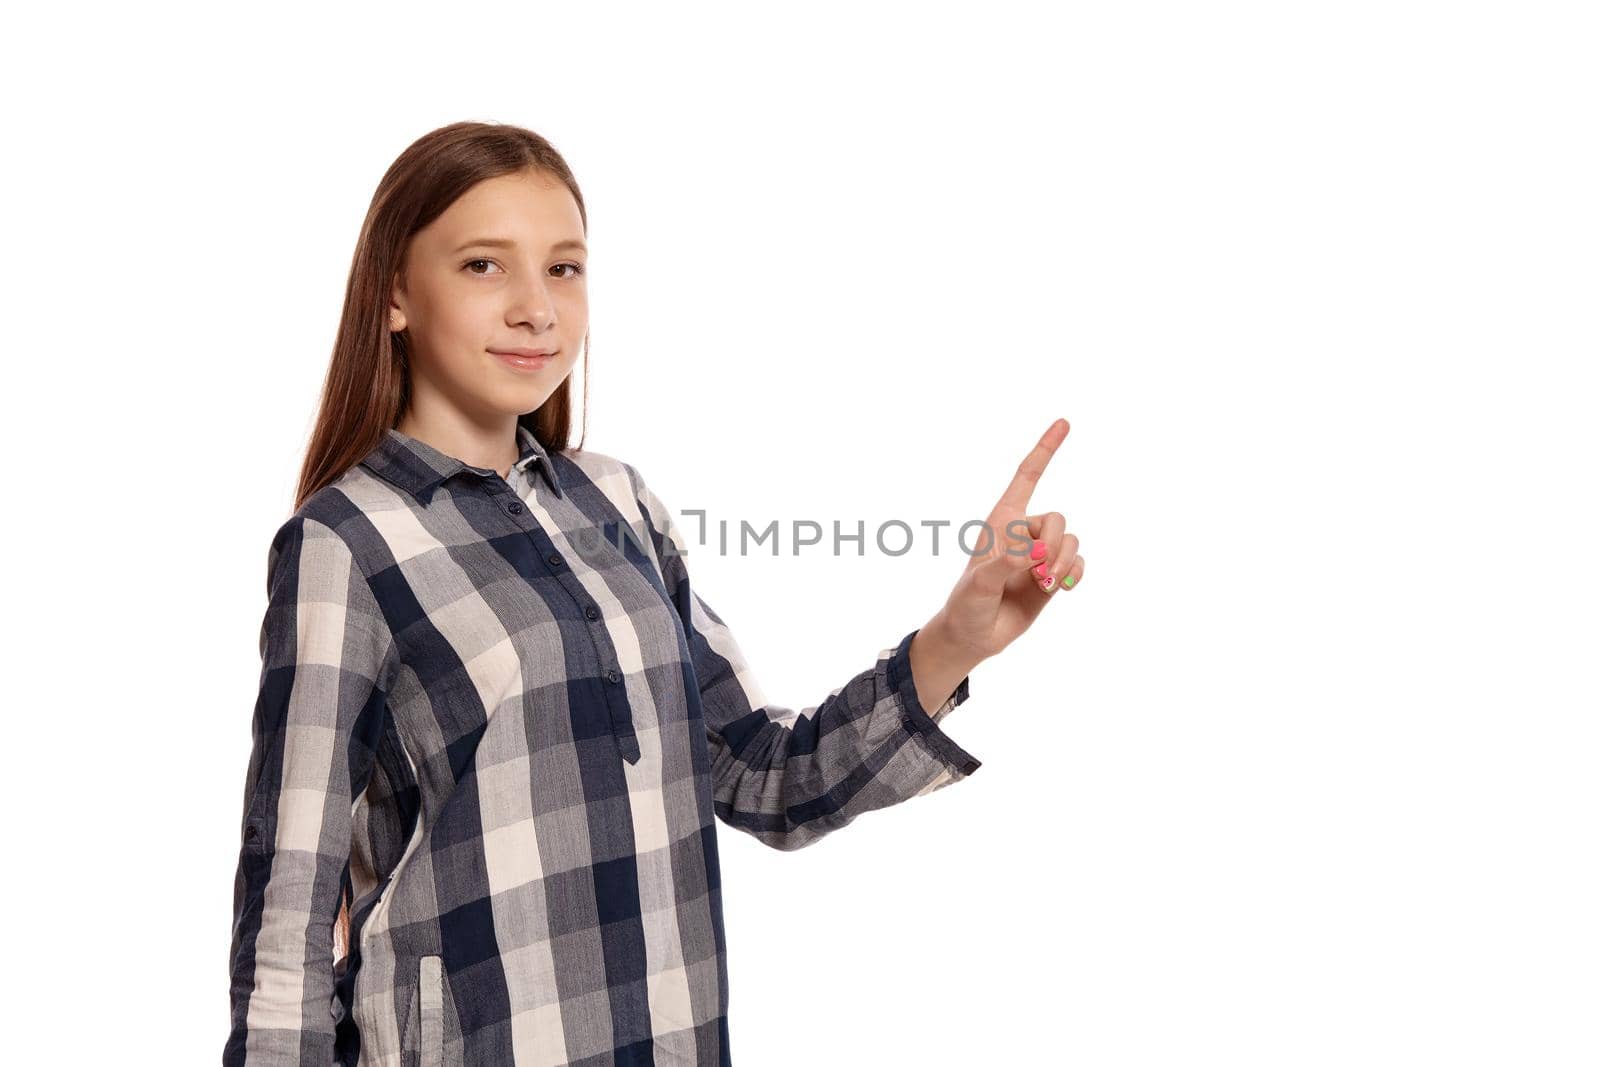 Portrait of a cute teenager in a casual checkered shirt gesticulating while posing isolated on white studio background. Long hair, healthy clean skin and brown eyes. Sincere emotions concept. Copy space.